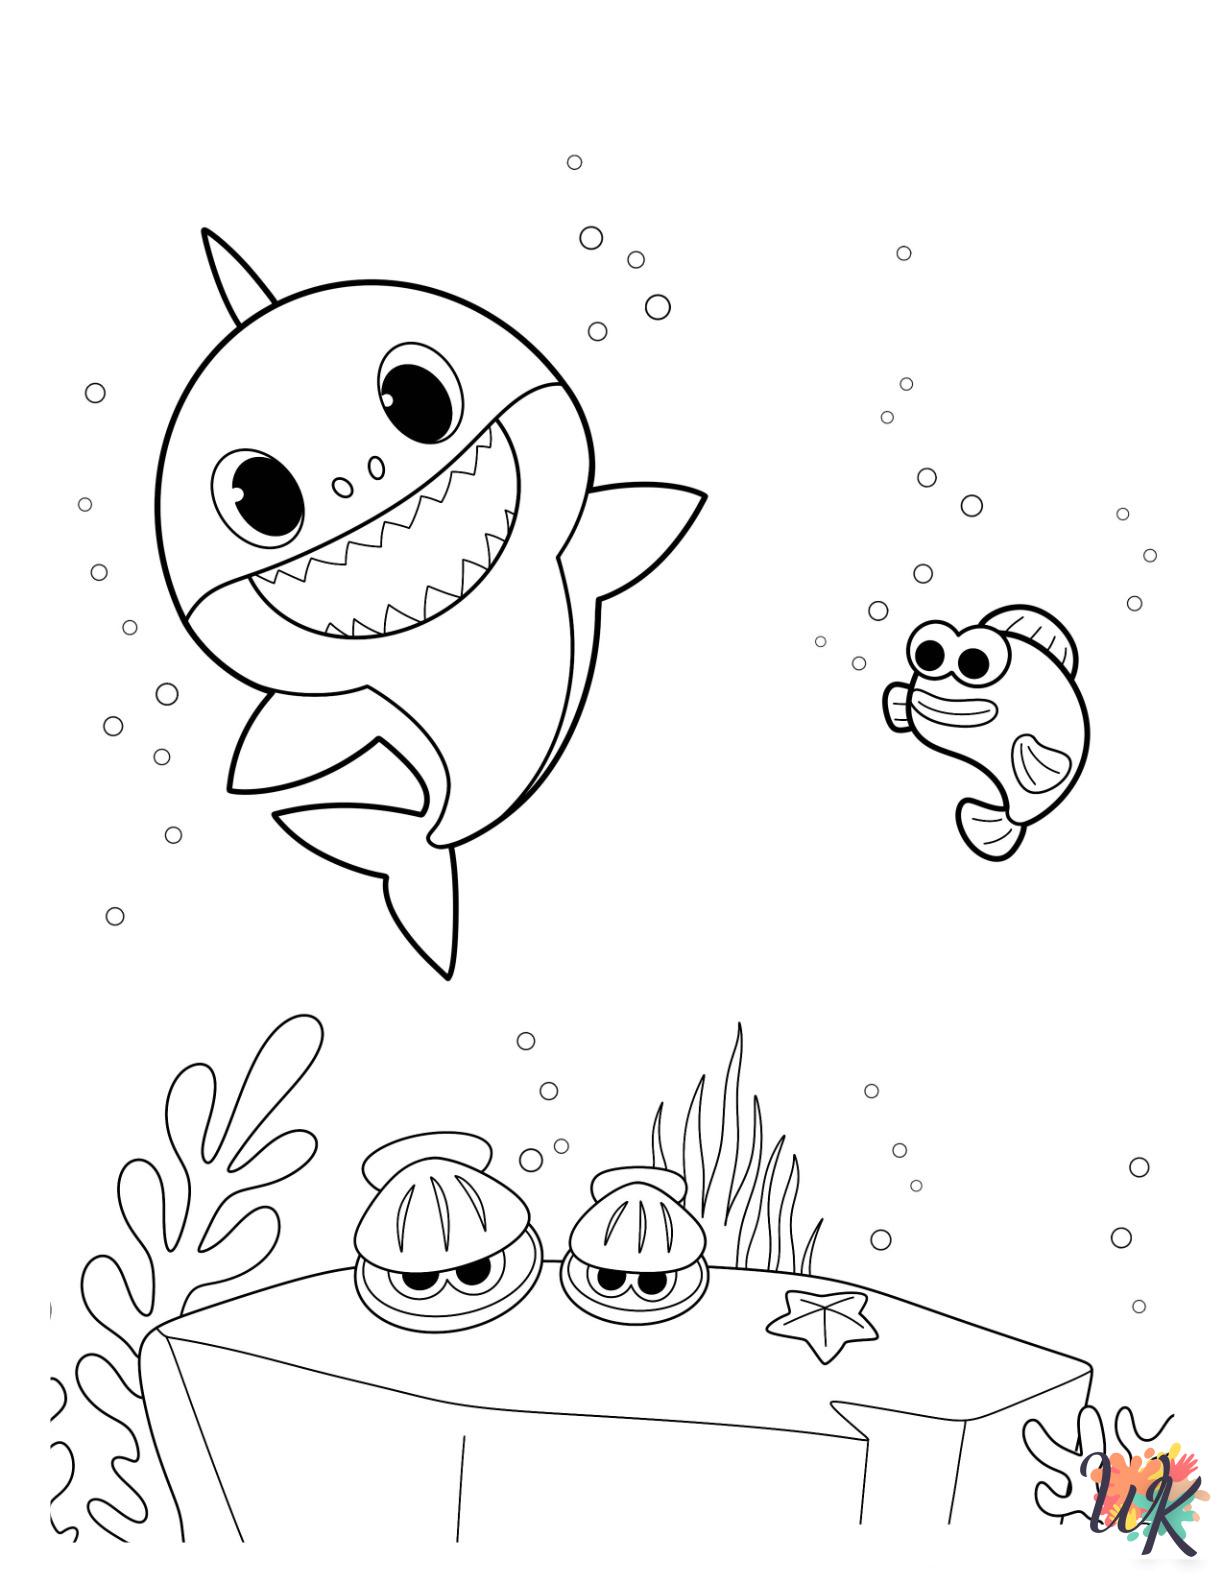 Shark coloring pages printable free